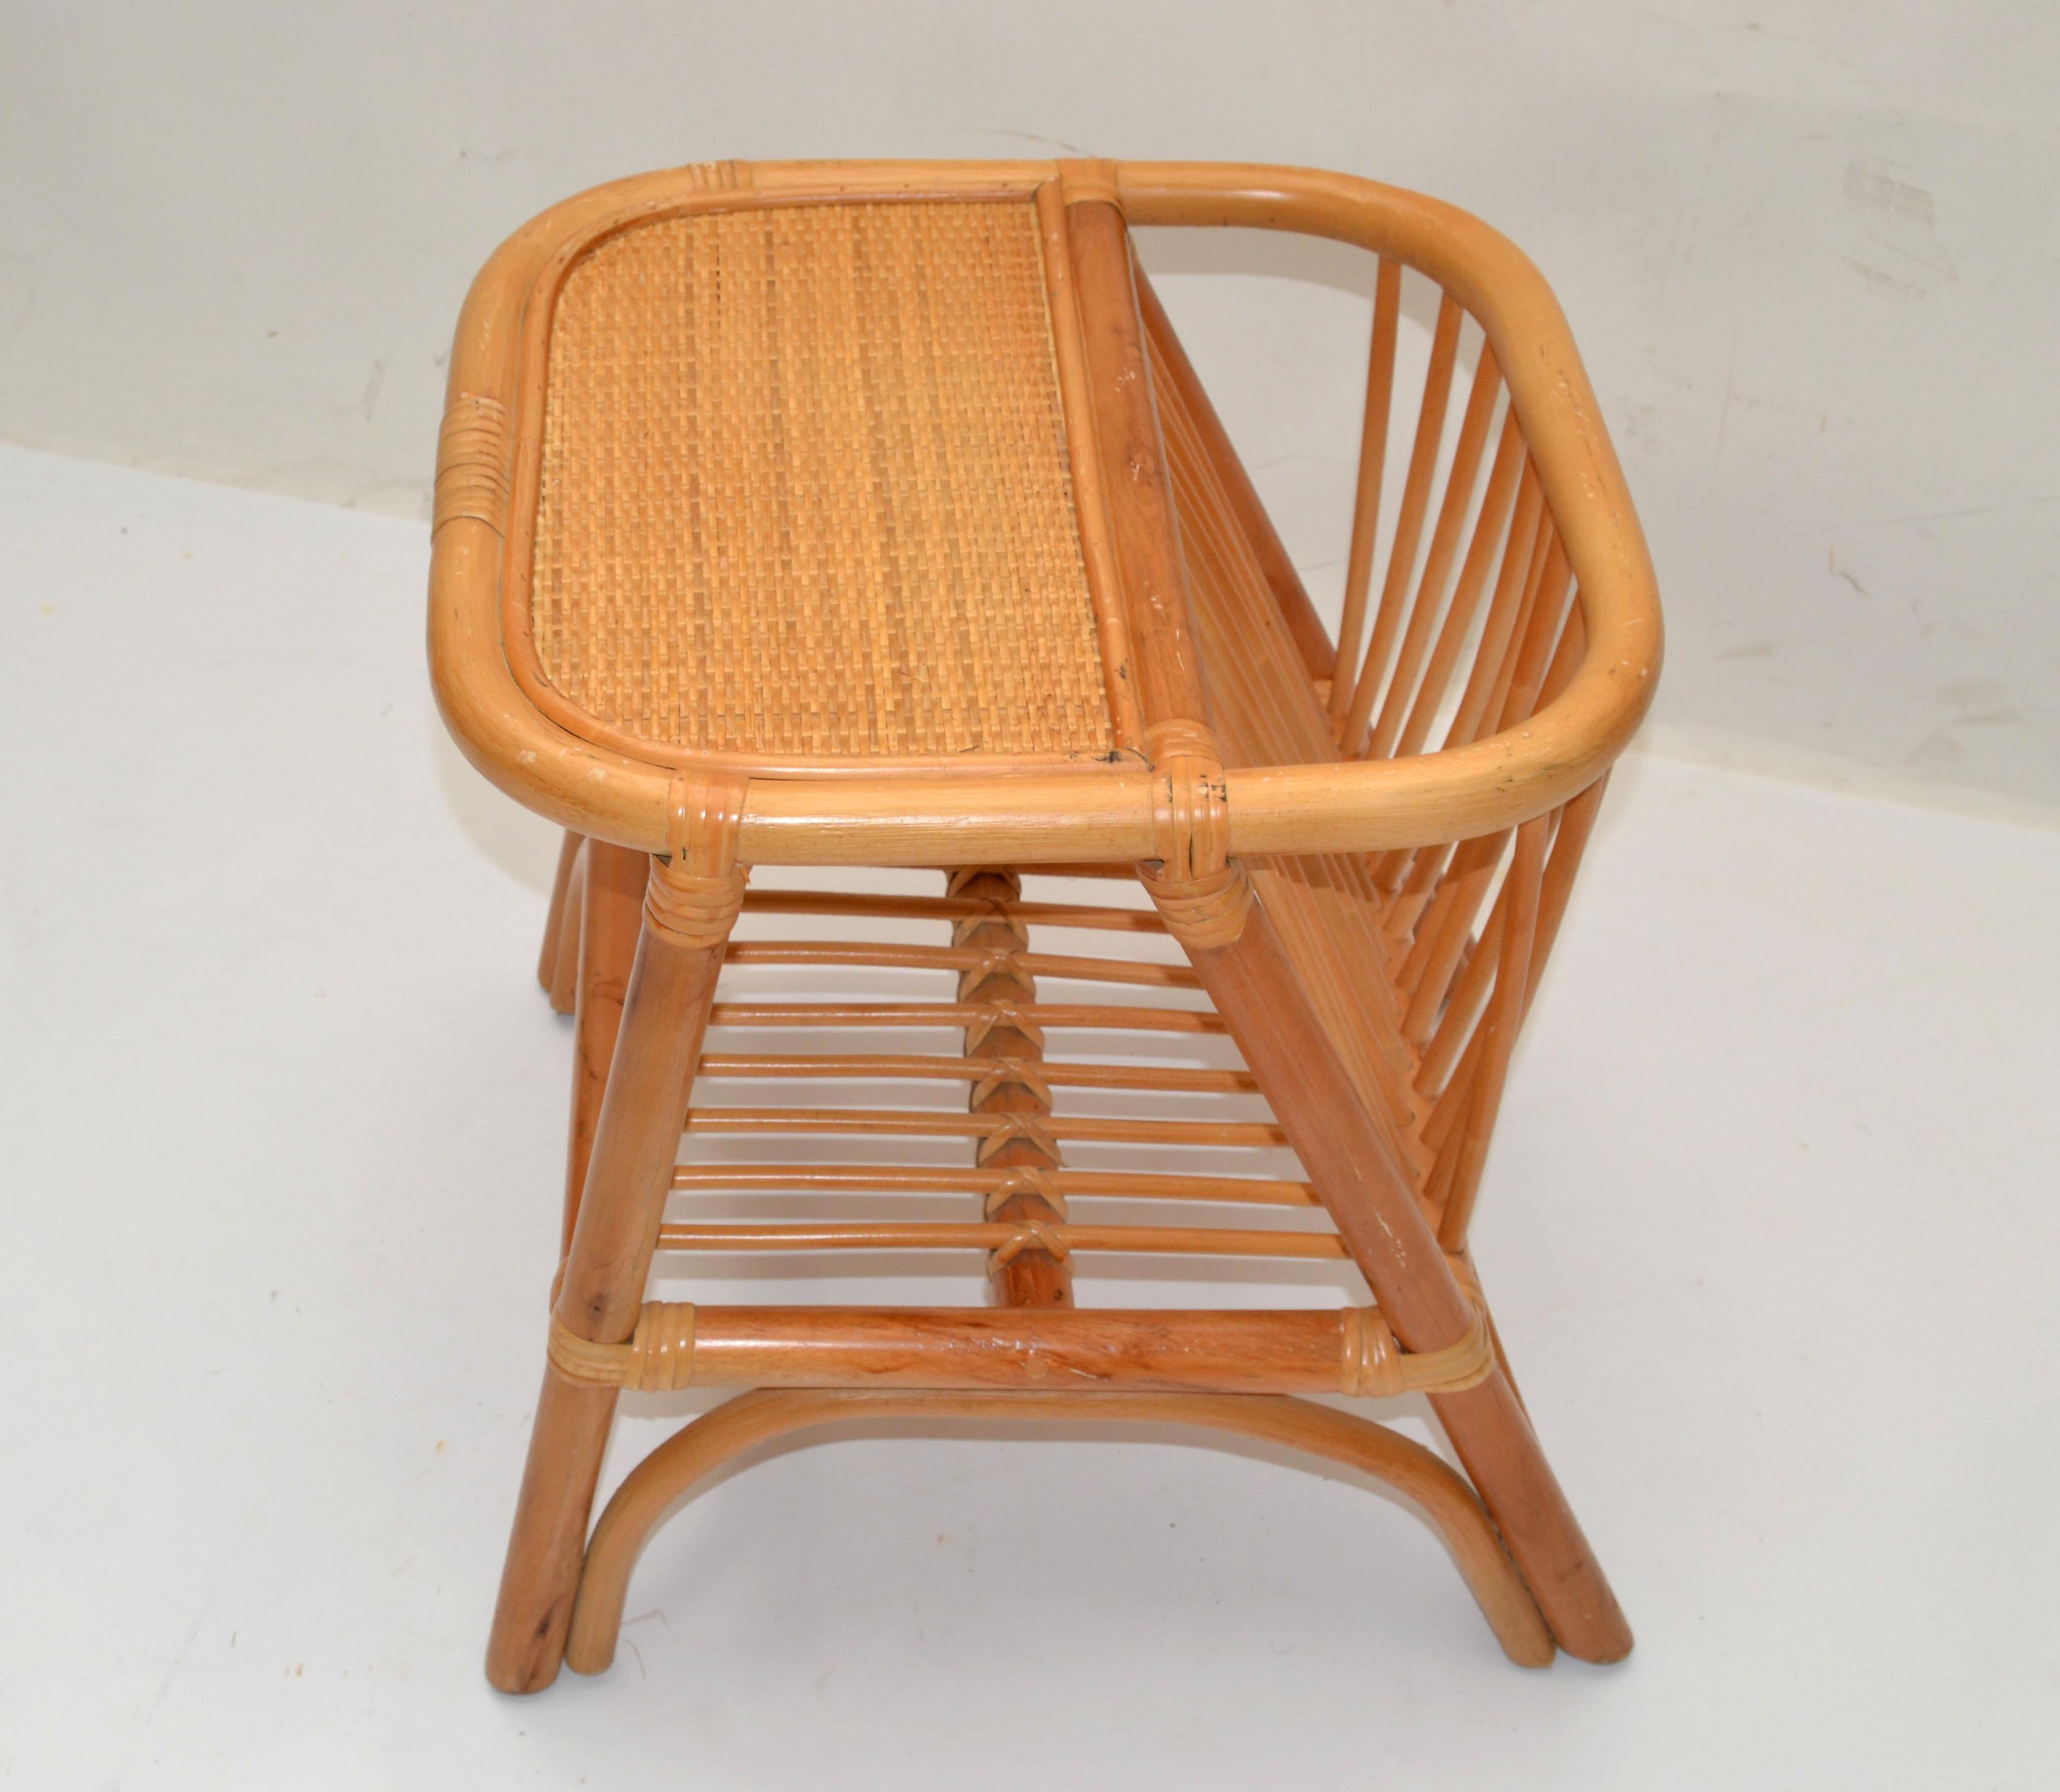 Bohemian Mid-Century Modern Handcrafted Bamboo & Cane Magazine Rack Side Table In Good Condition For Sale In Miami, FL